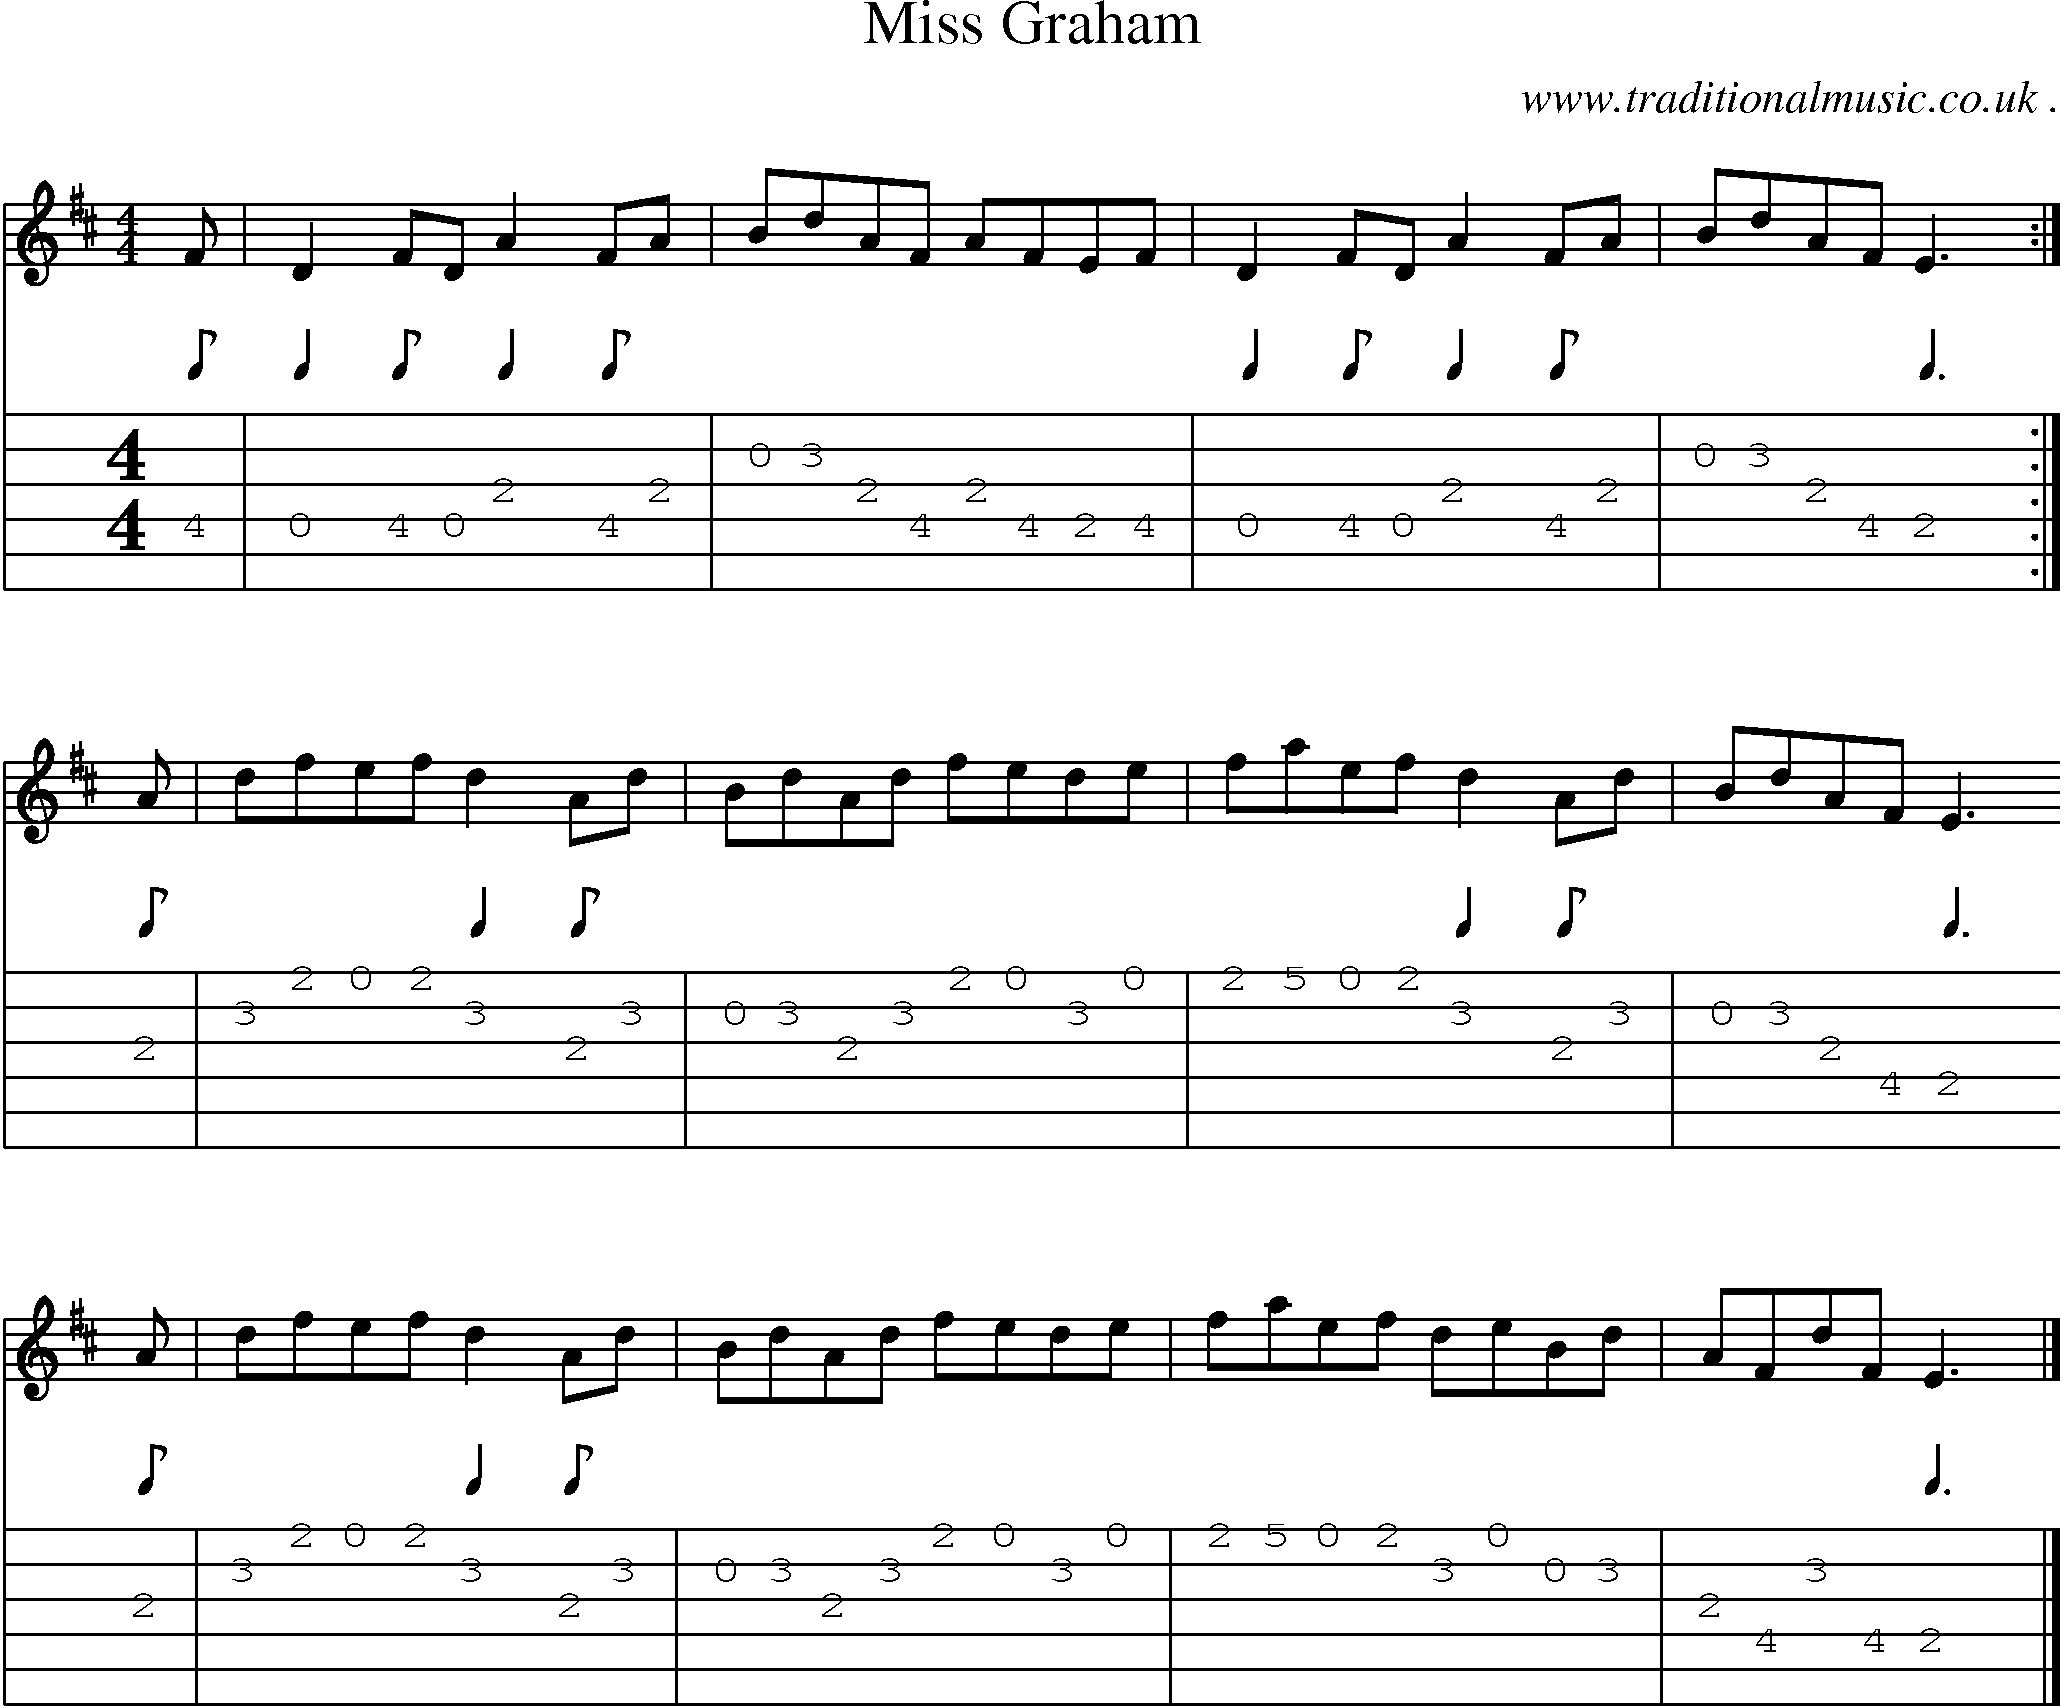 Sheet-music  score, Chords and Guitar Tabs for Miss Graham